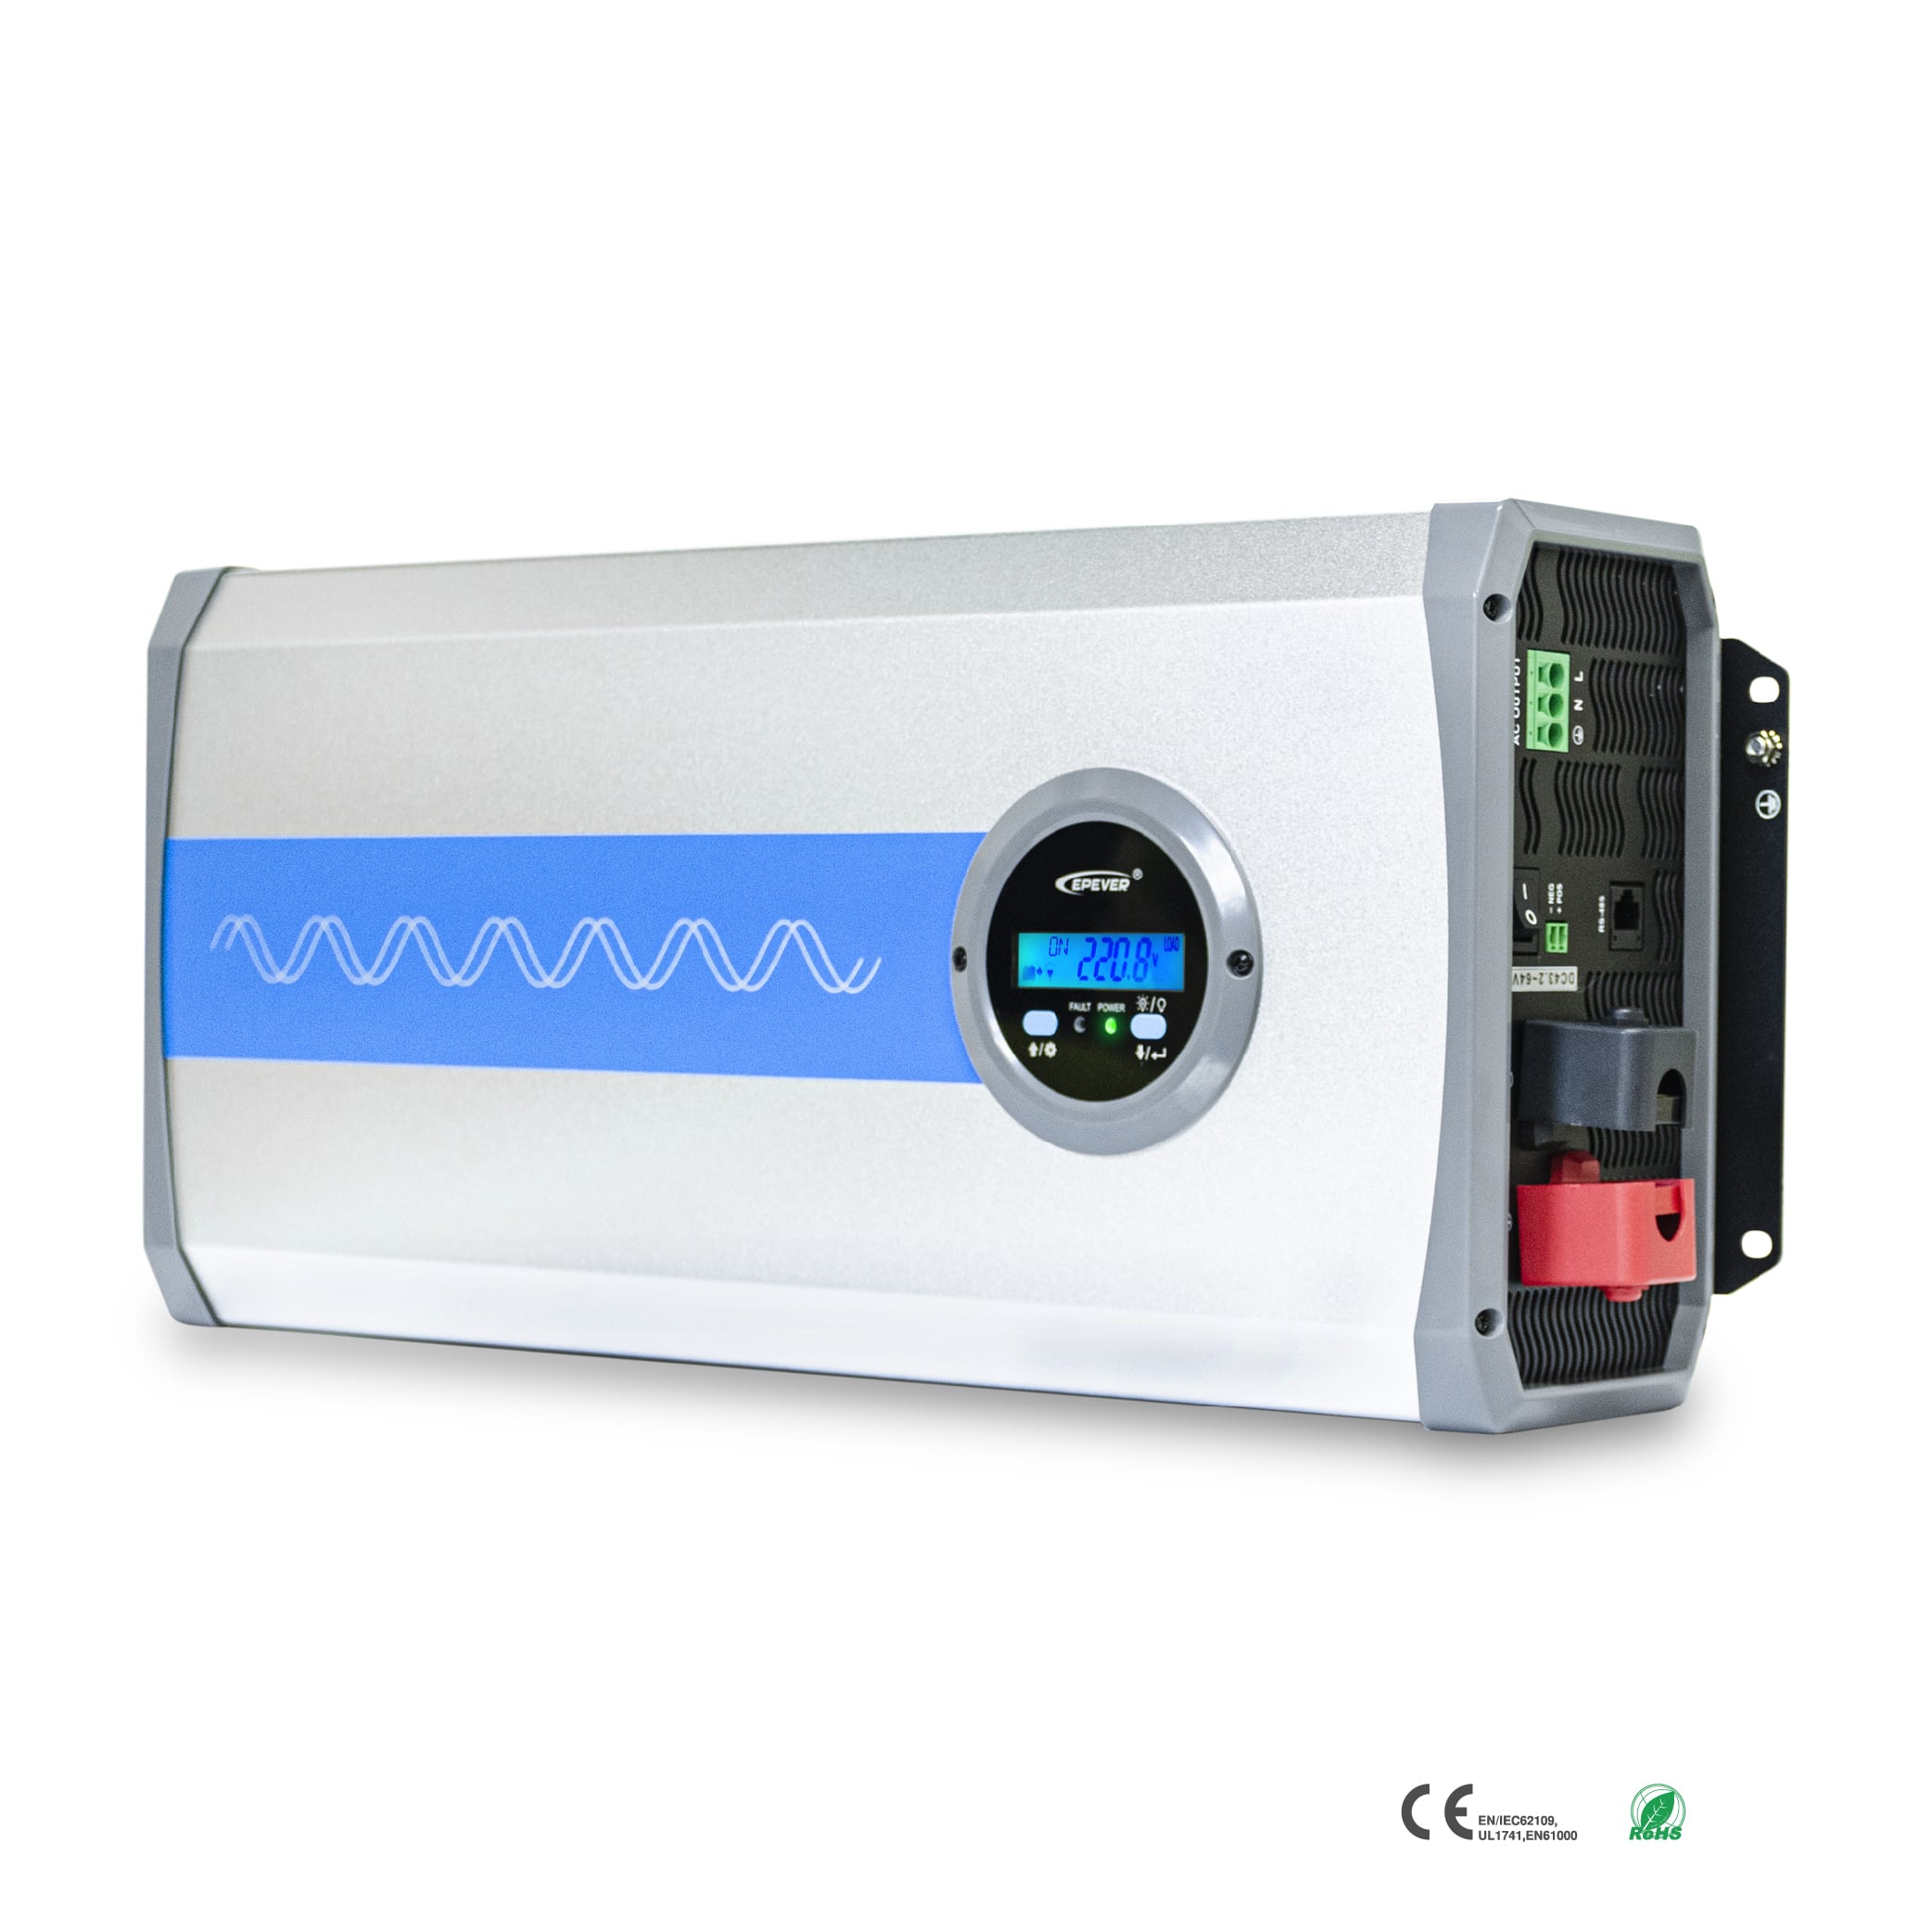 IPower-Plus 110/120VAC(500~4000W) Pure Sine Wave Inverter - EPEVER